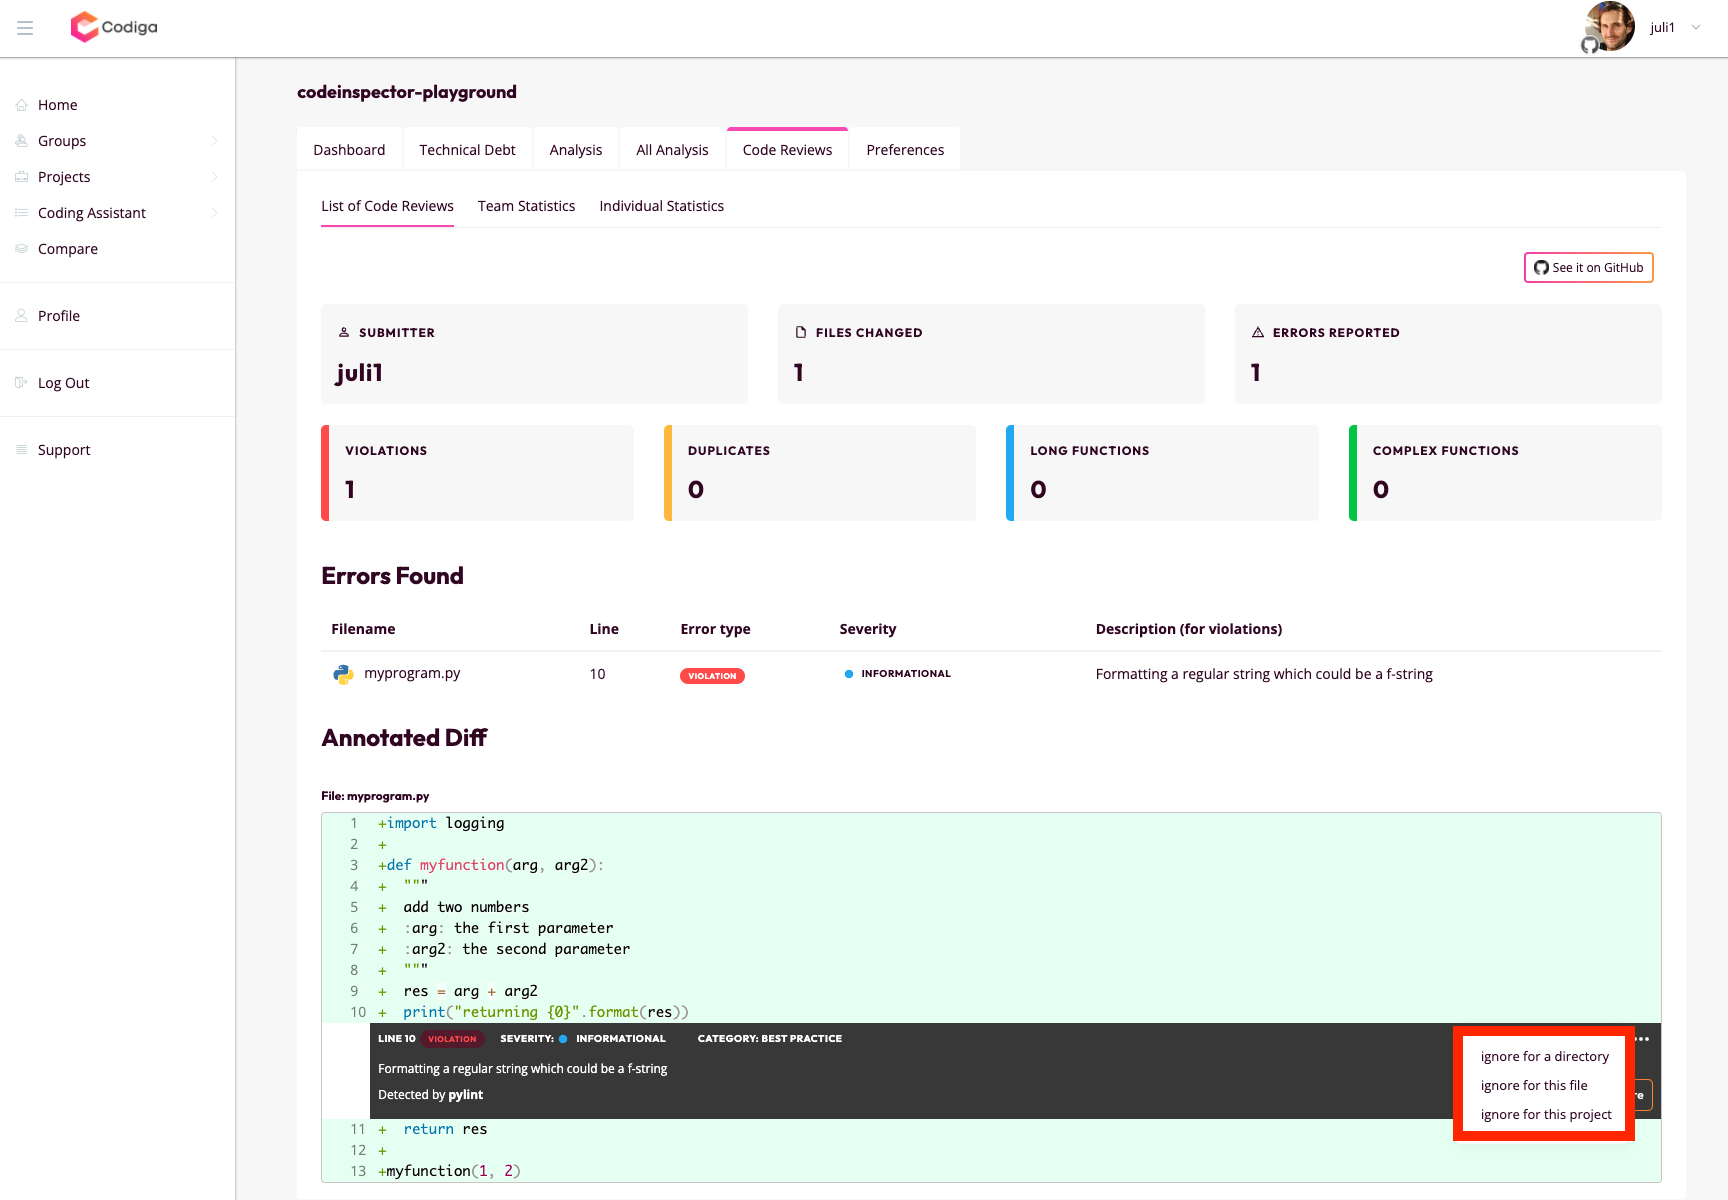 Check Code Review on the Codiga Interface